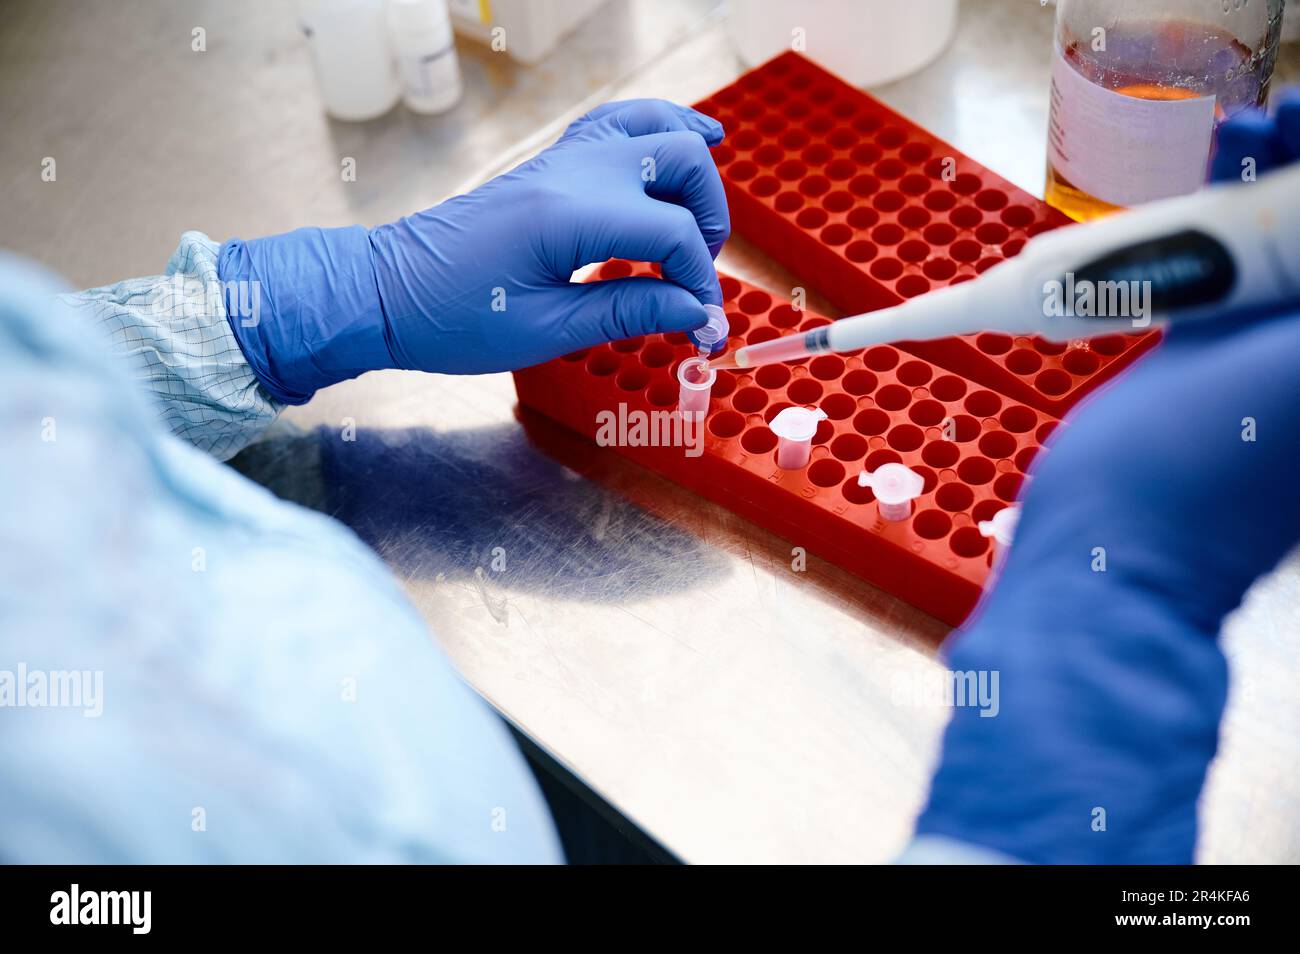 Technician works investigating analysis sample in test tubes Stock Photo